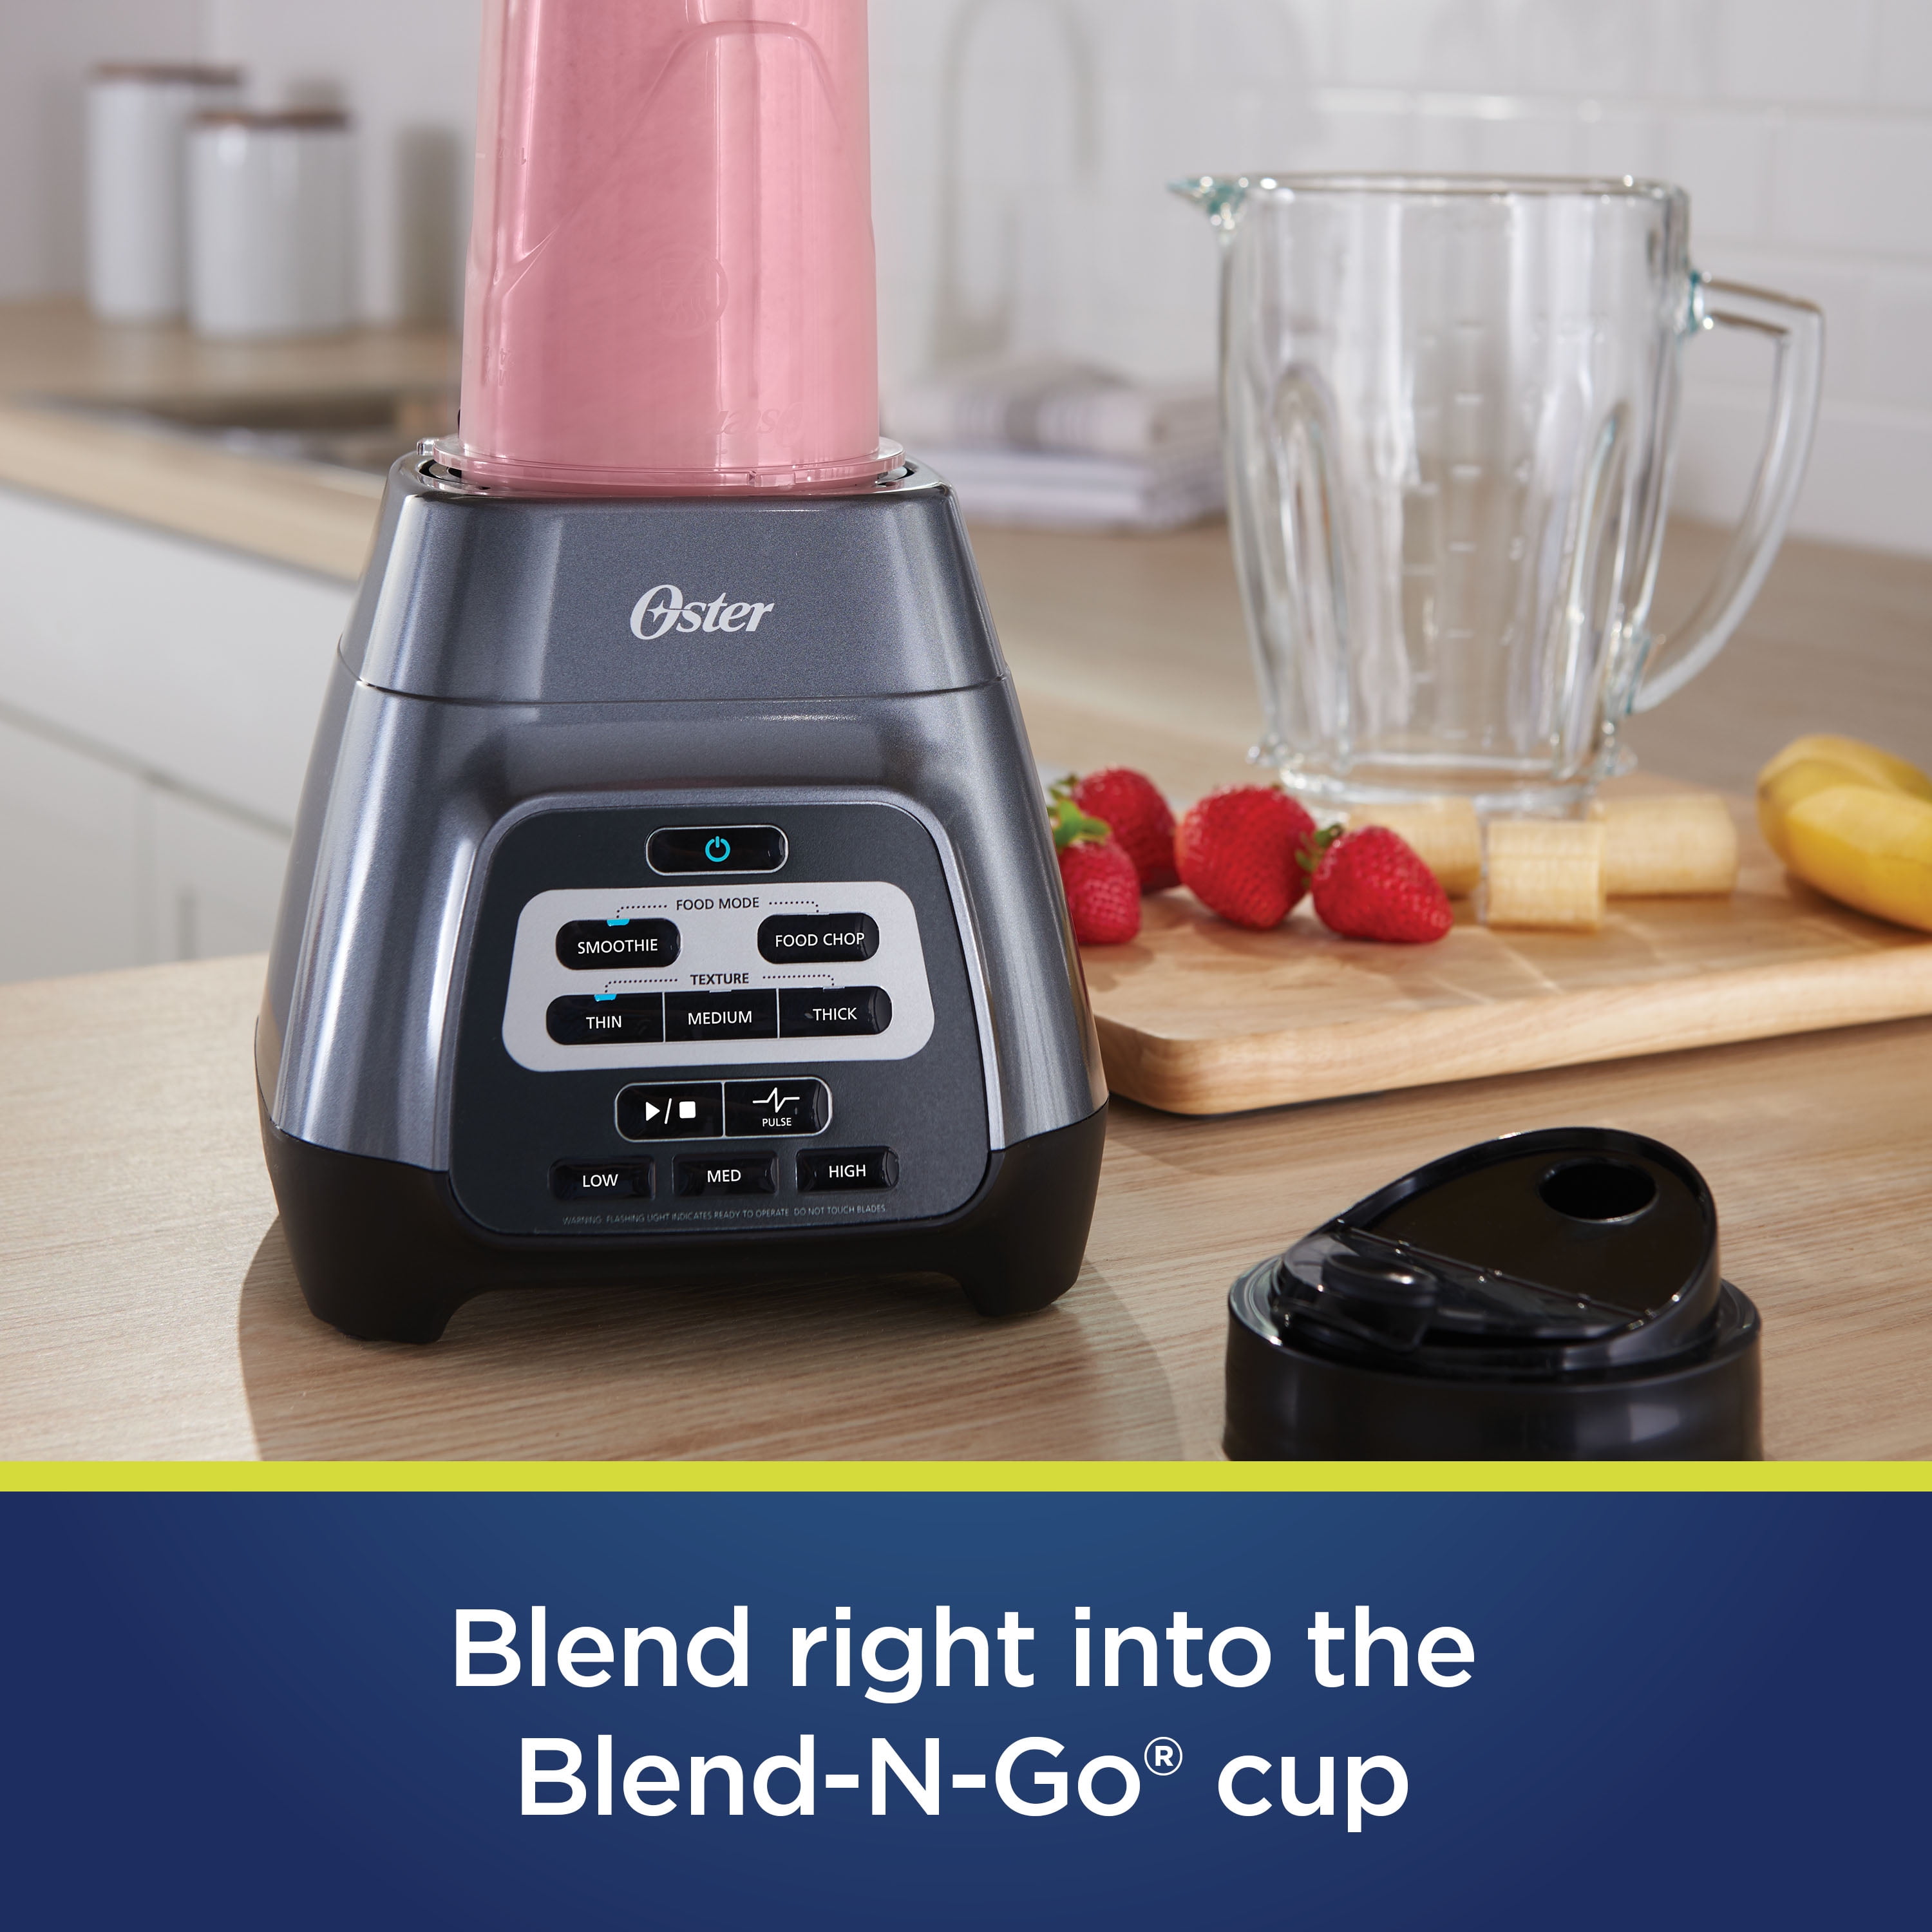 Oster Master Series Blender with Texture Select Settings, Blend-N-Go Cup and Glass Jar, Gray - 2